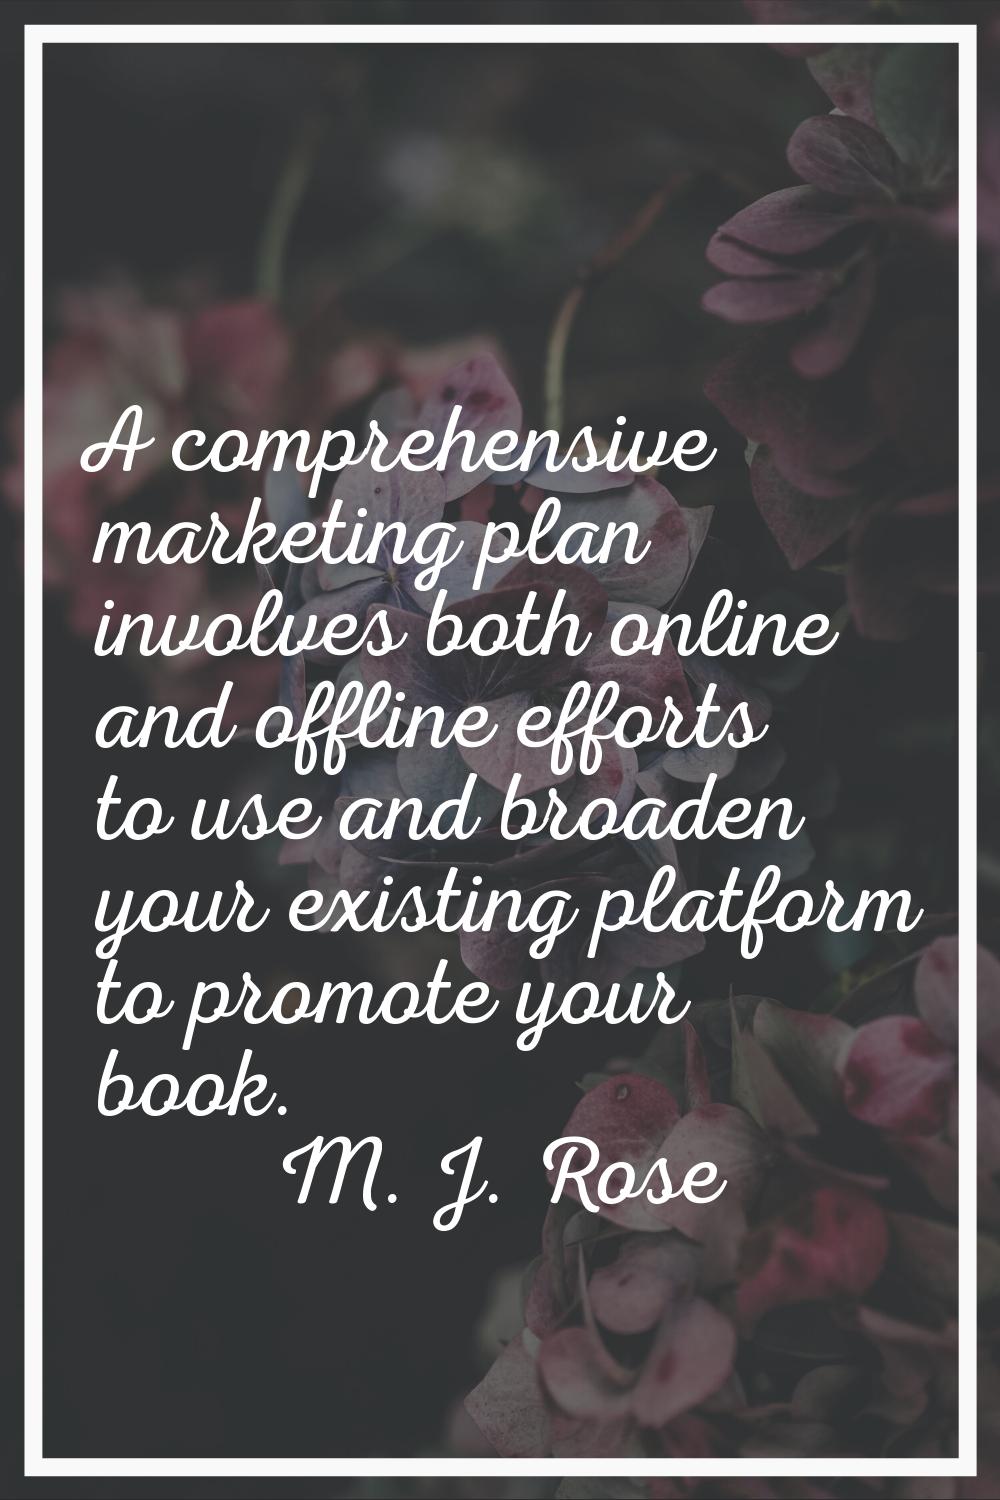 A comprehensive marketing plan involves both online and offline efforts to use and broaden your exi